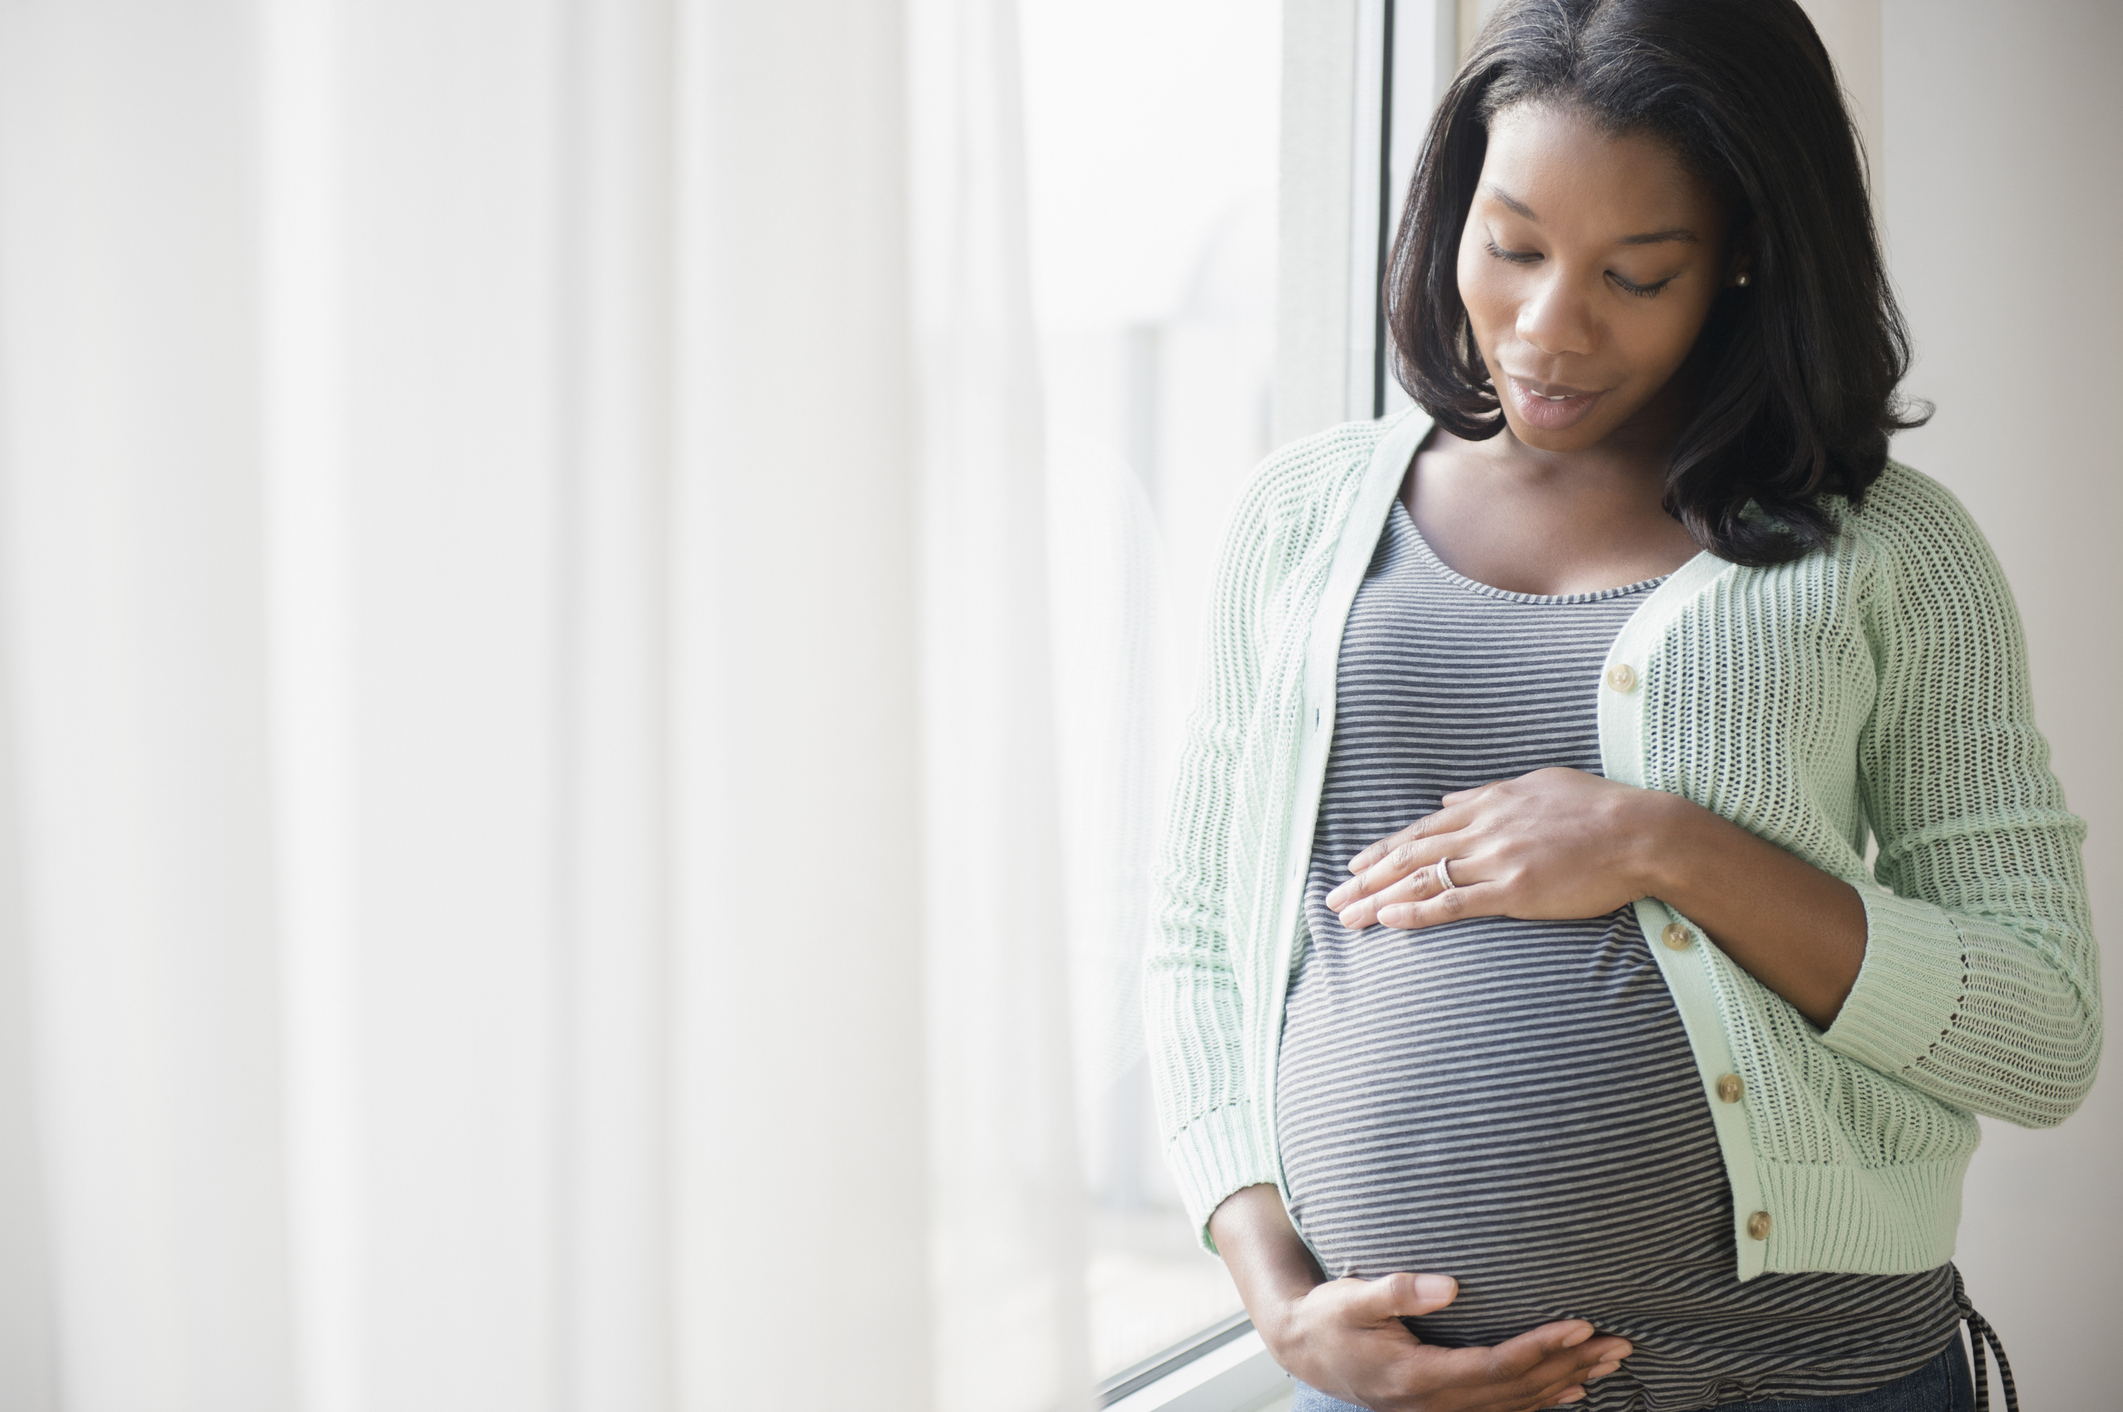 Pregnant Women Will Finally Be Included In Clinical Drug Trials - HelloFlo.